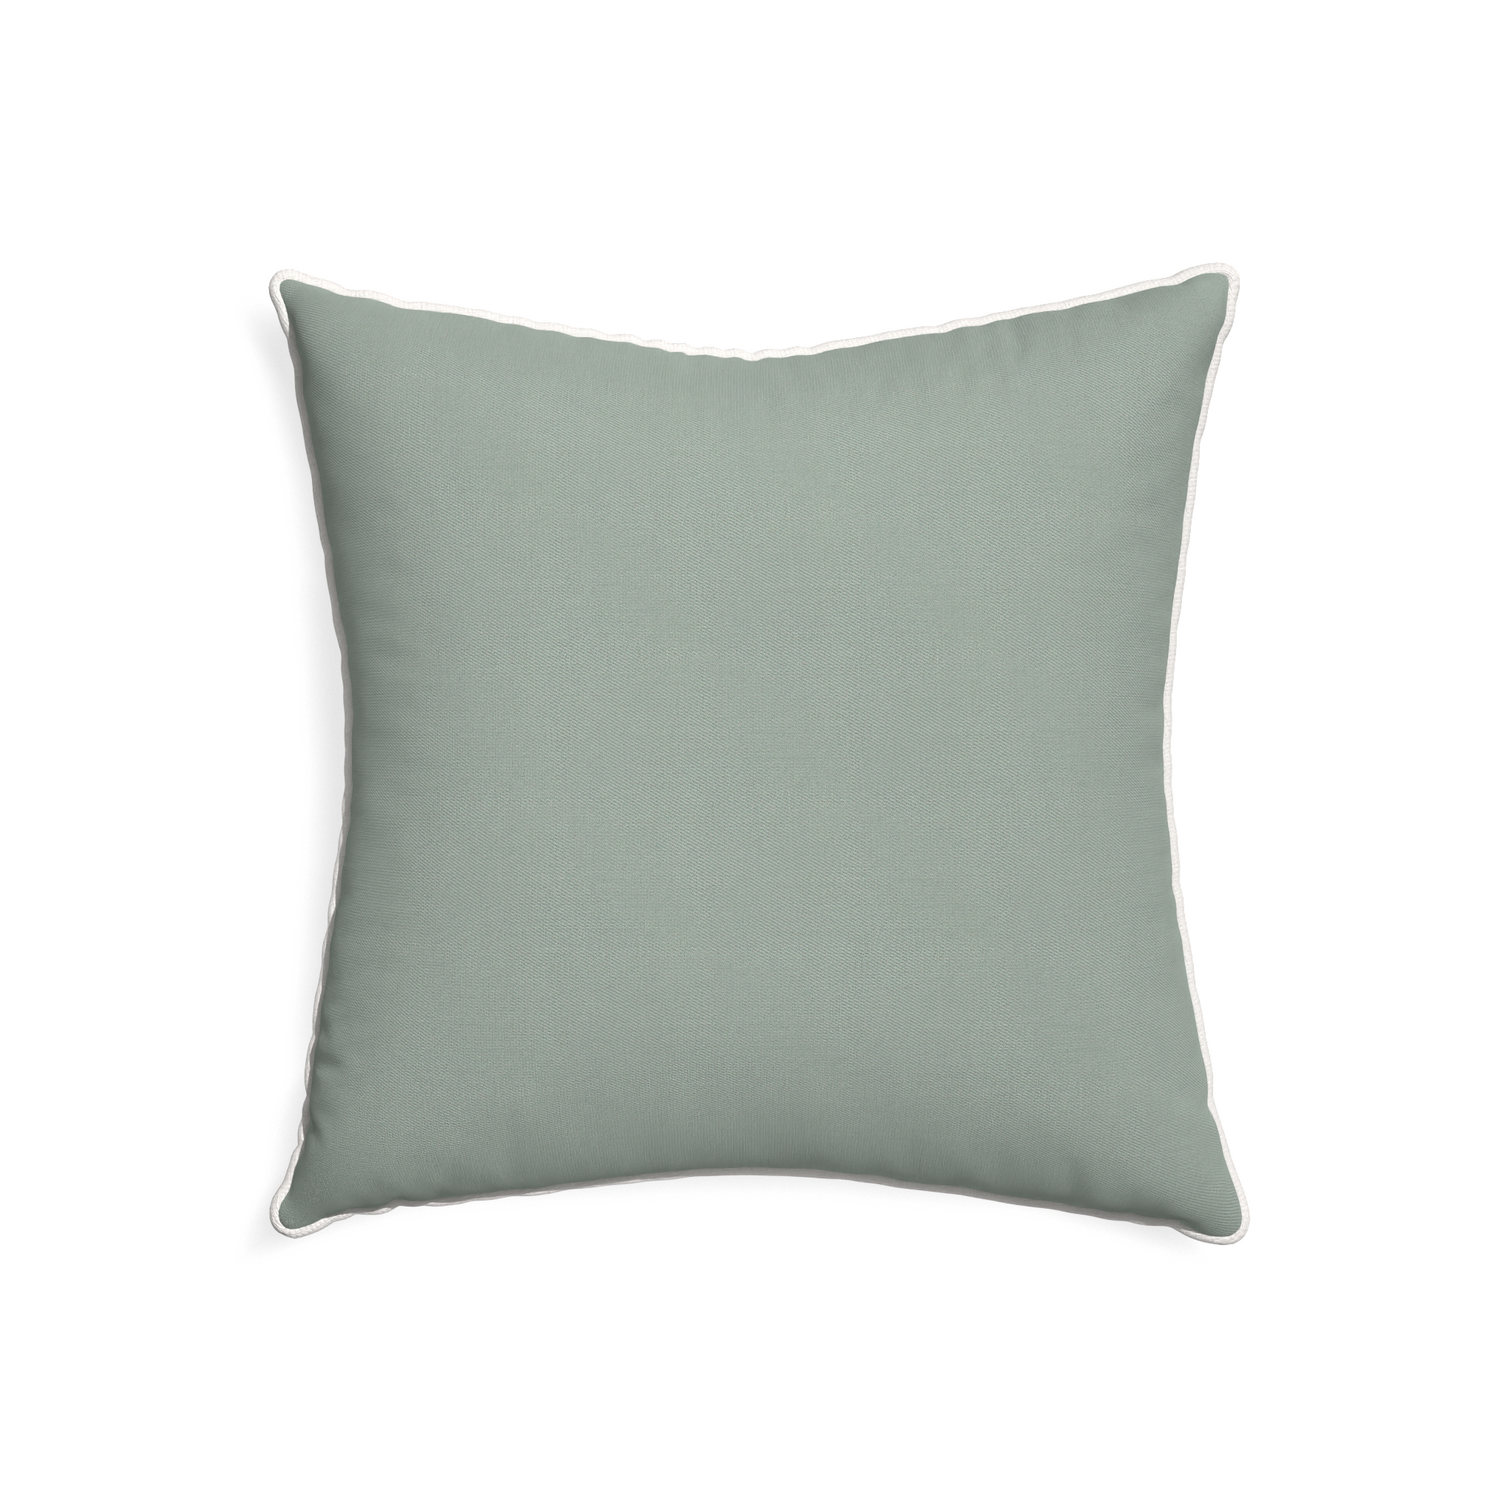 22-square sage custom sage green cottonpillow with snow piping on white background